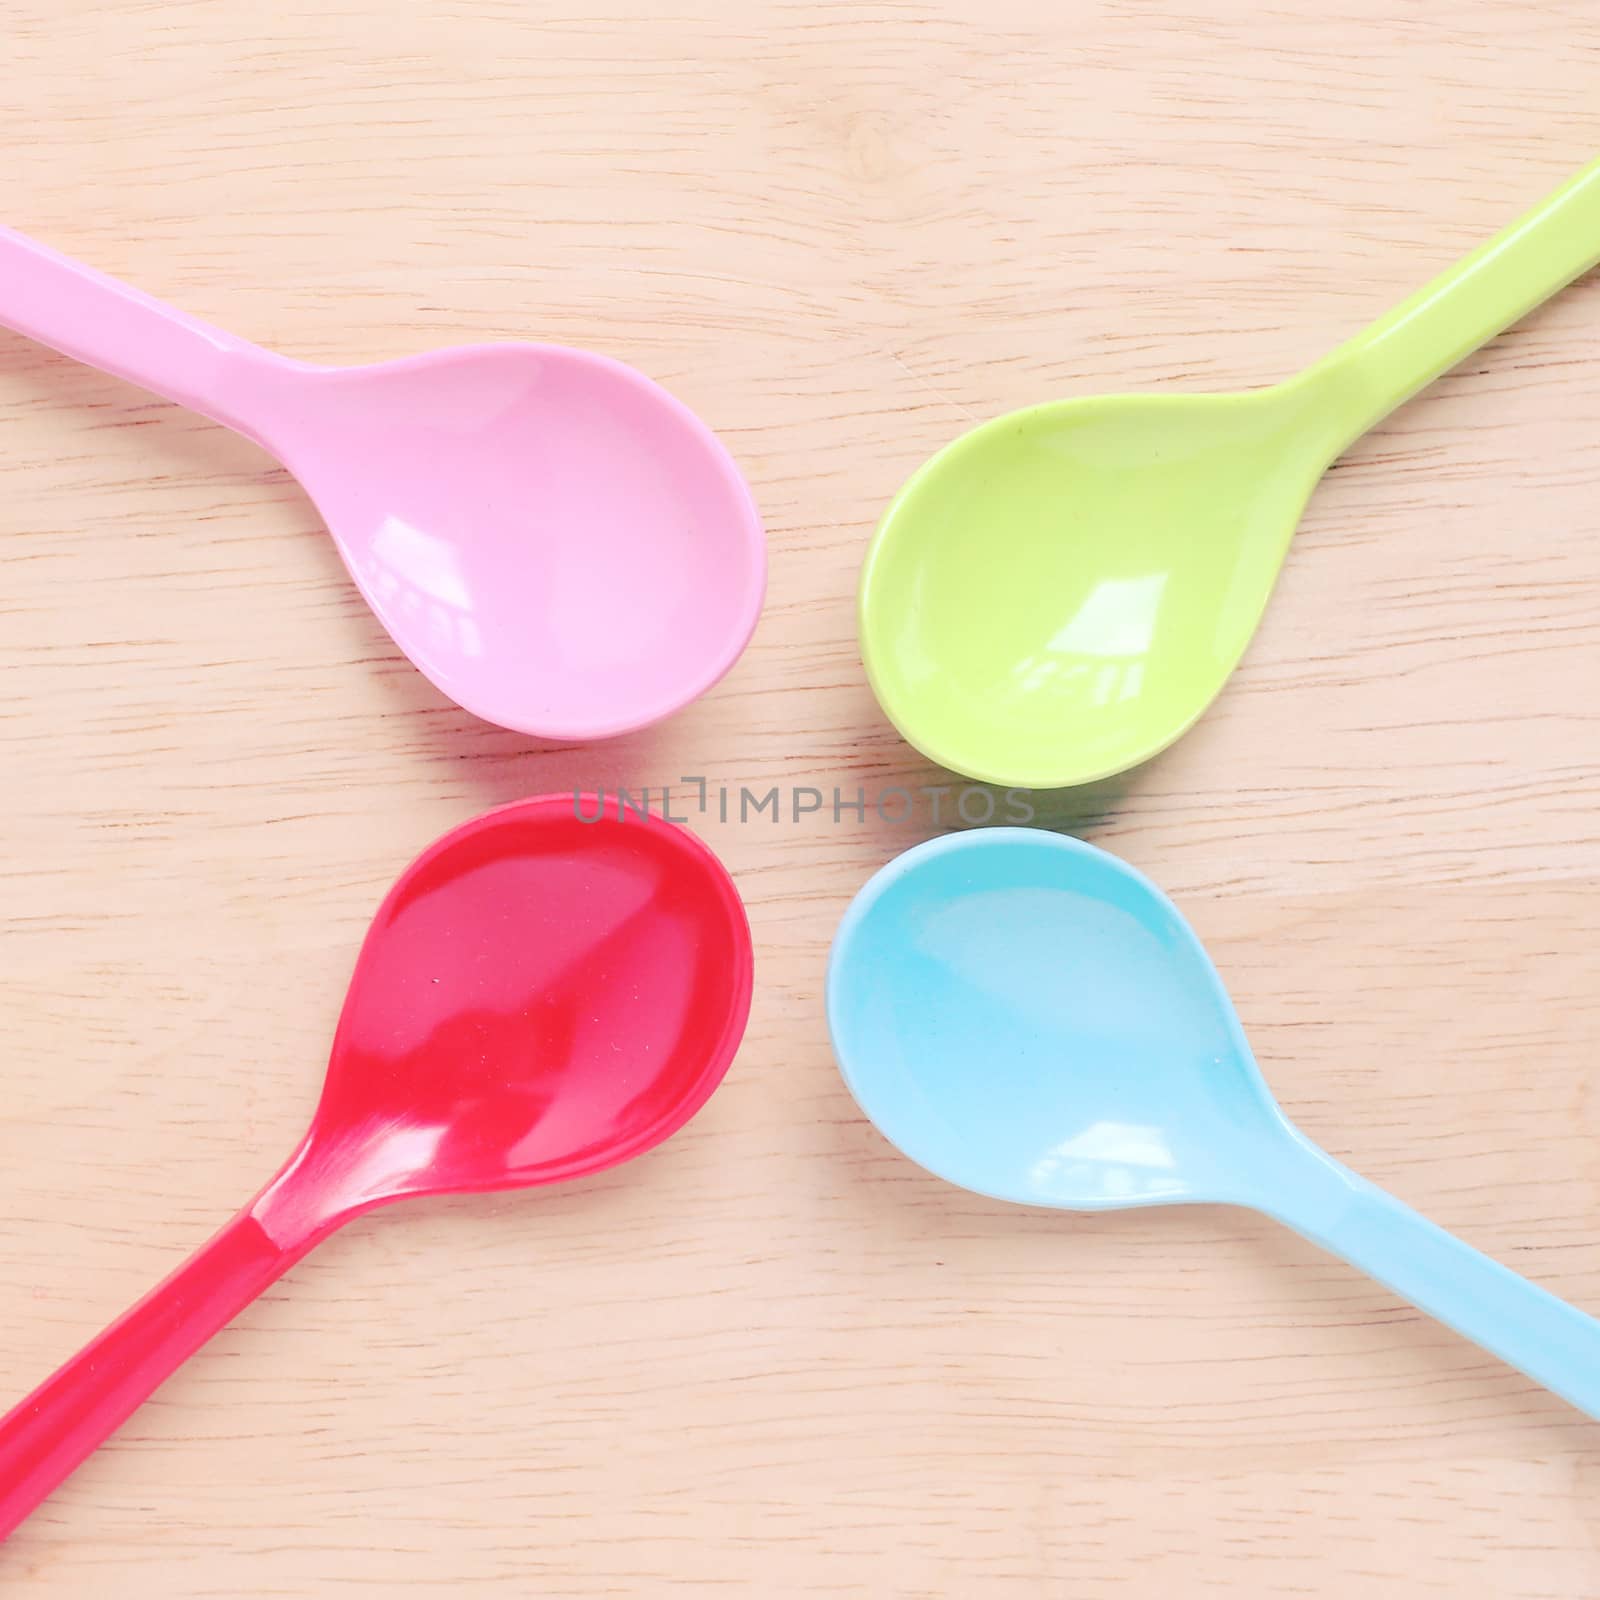 Colorful plastic spoons on wood with retro filter effect by nuchylee